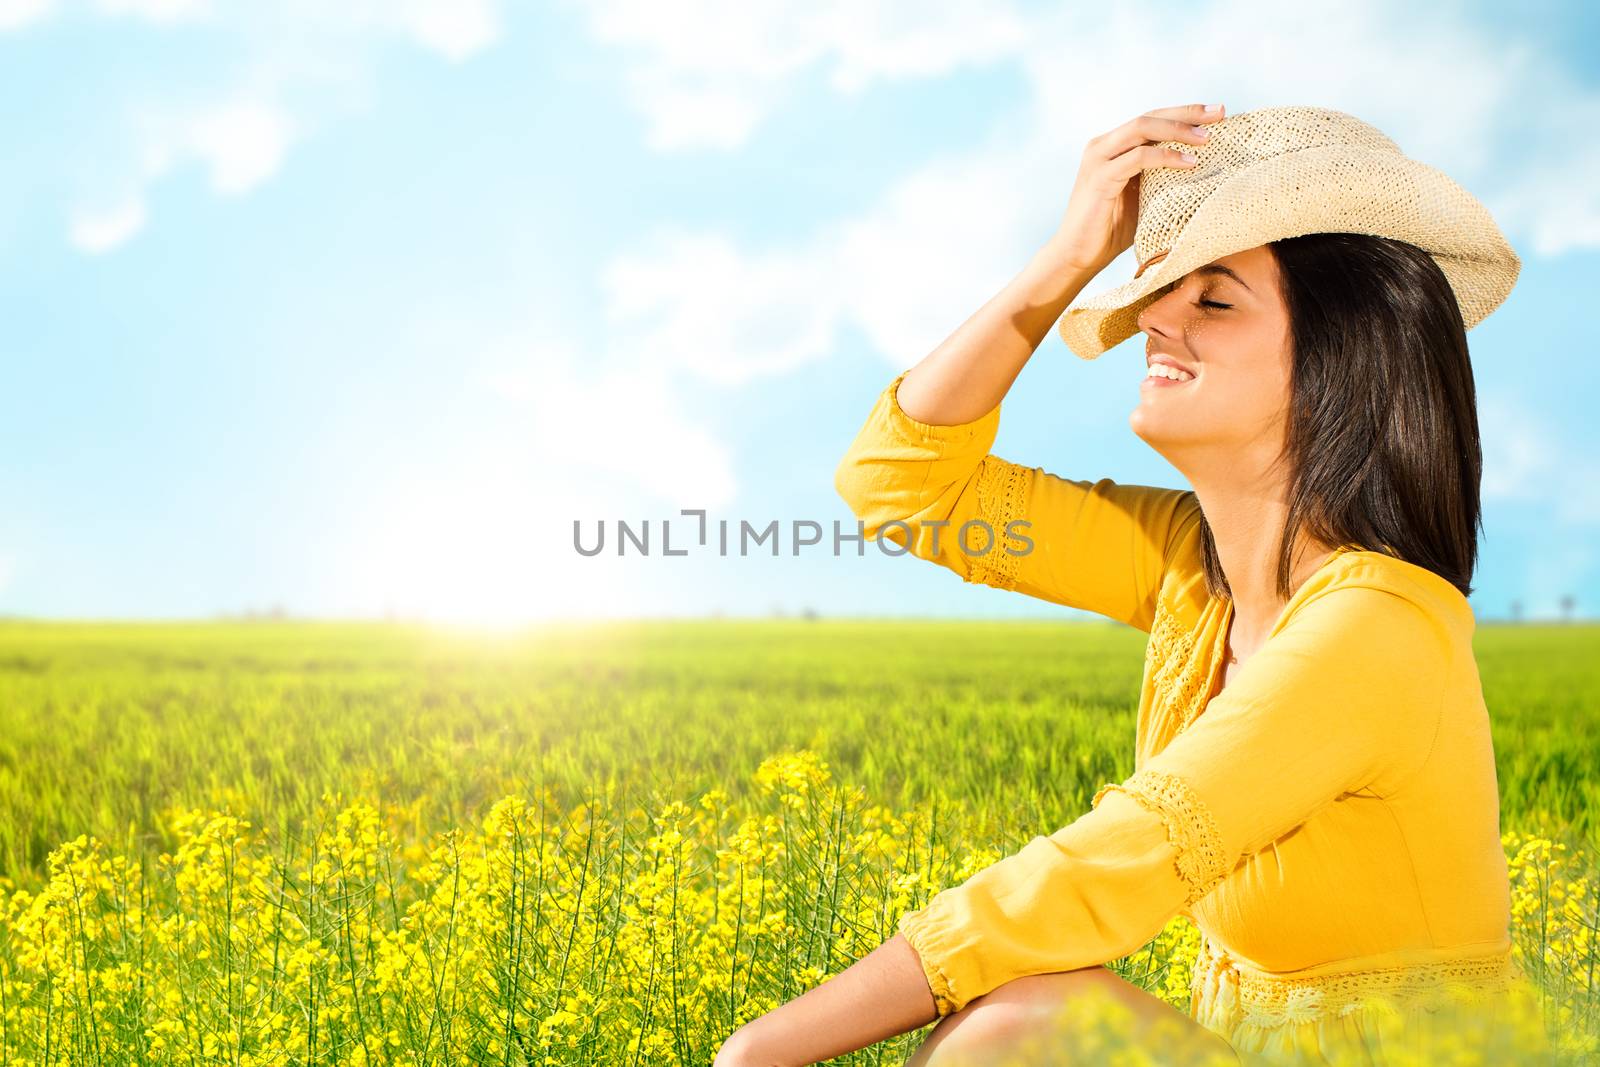 Close up portrait of attractive young woman in yellow dress sitting in green flower field.Happy girl wearing hat smiling with eyes closed enjoying nature.